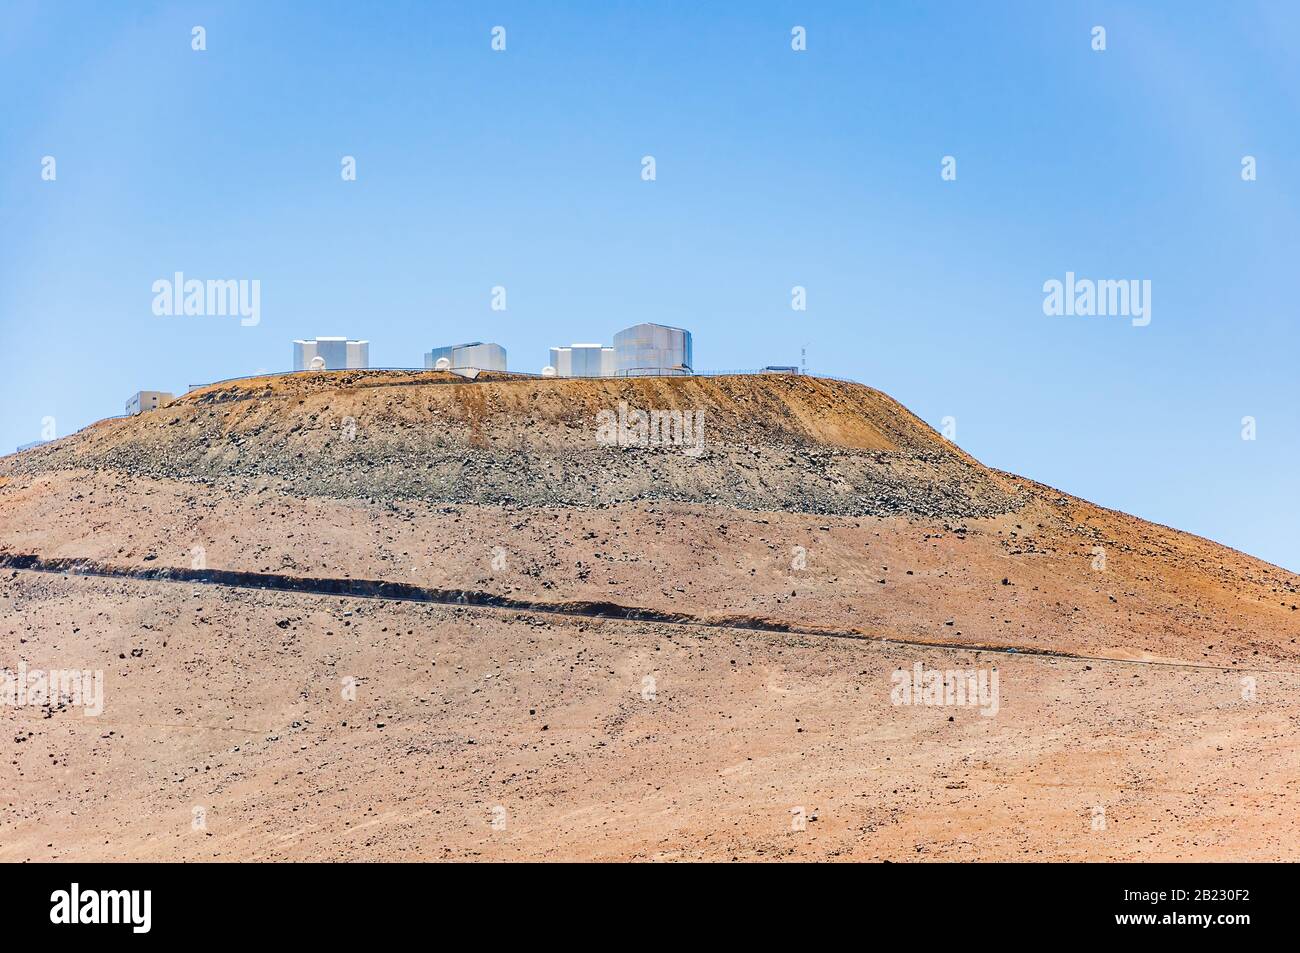 Very Large Telescope in Paranal, Chile Stock Photo - Alamy